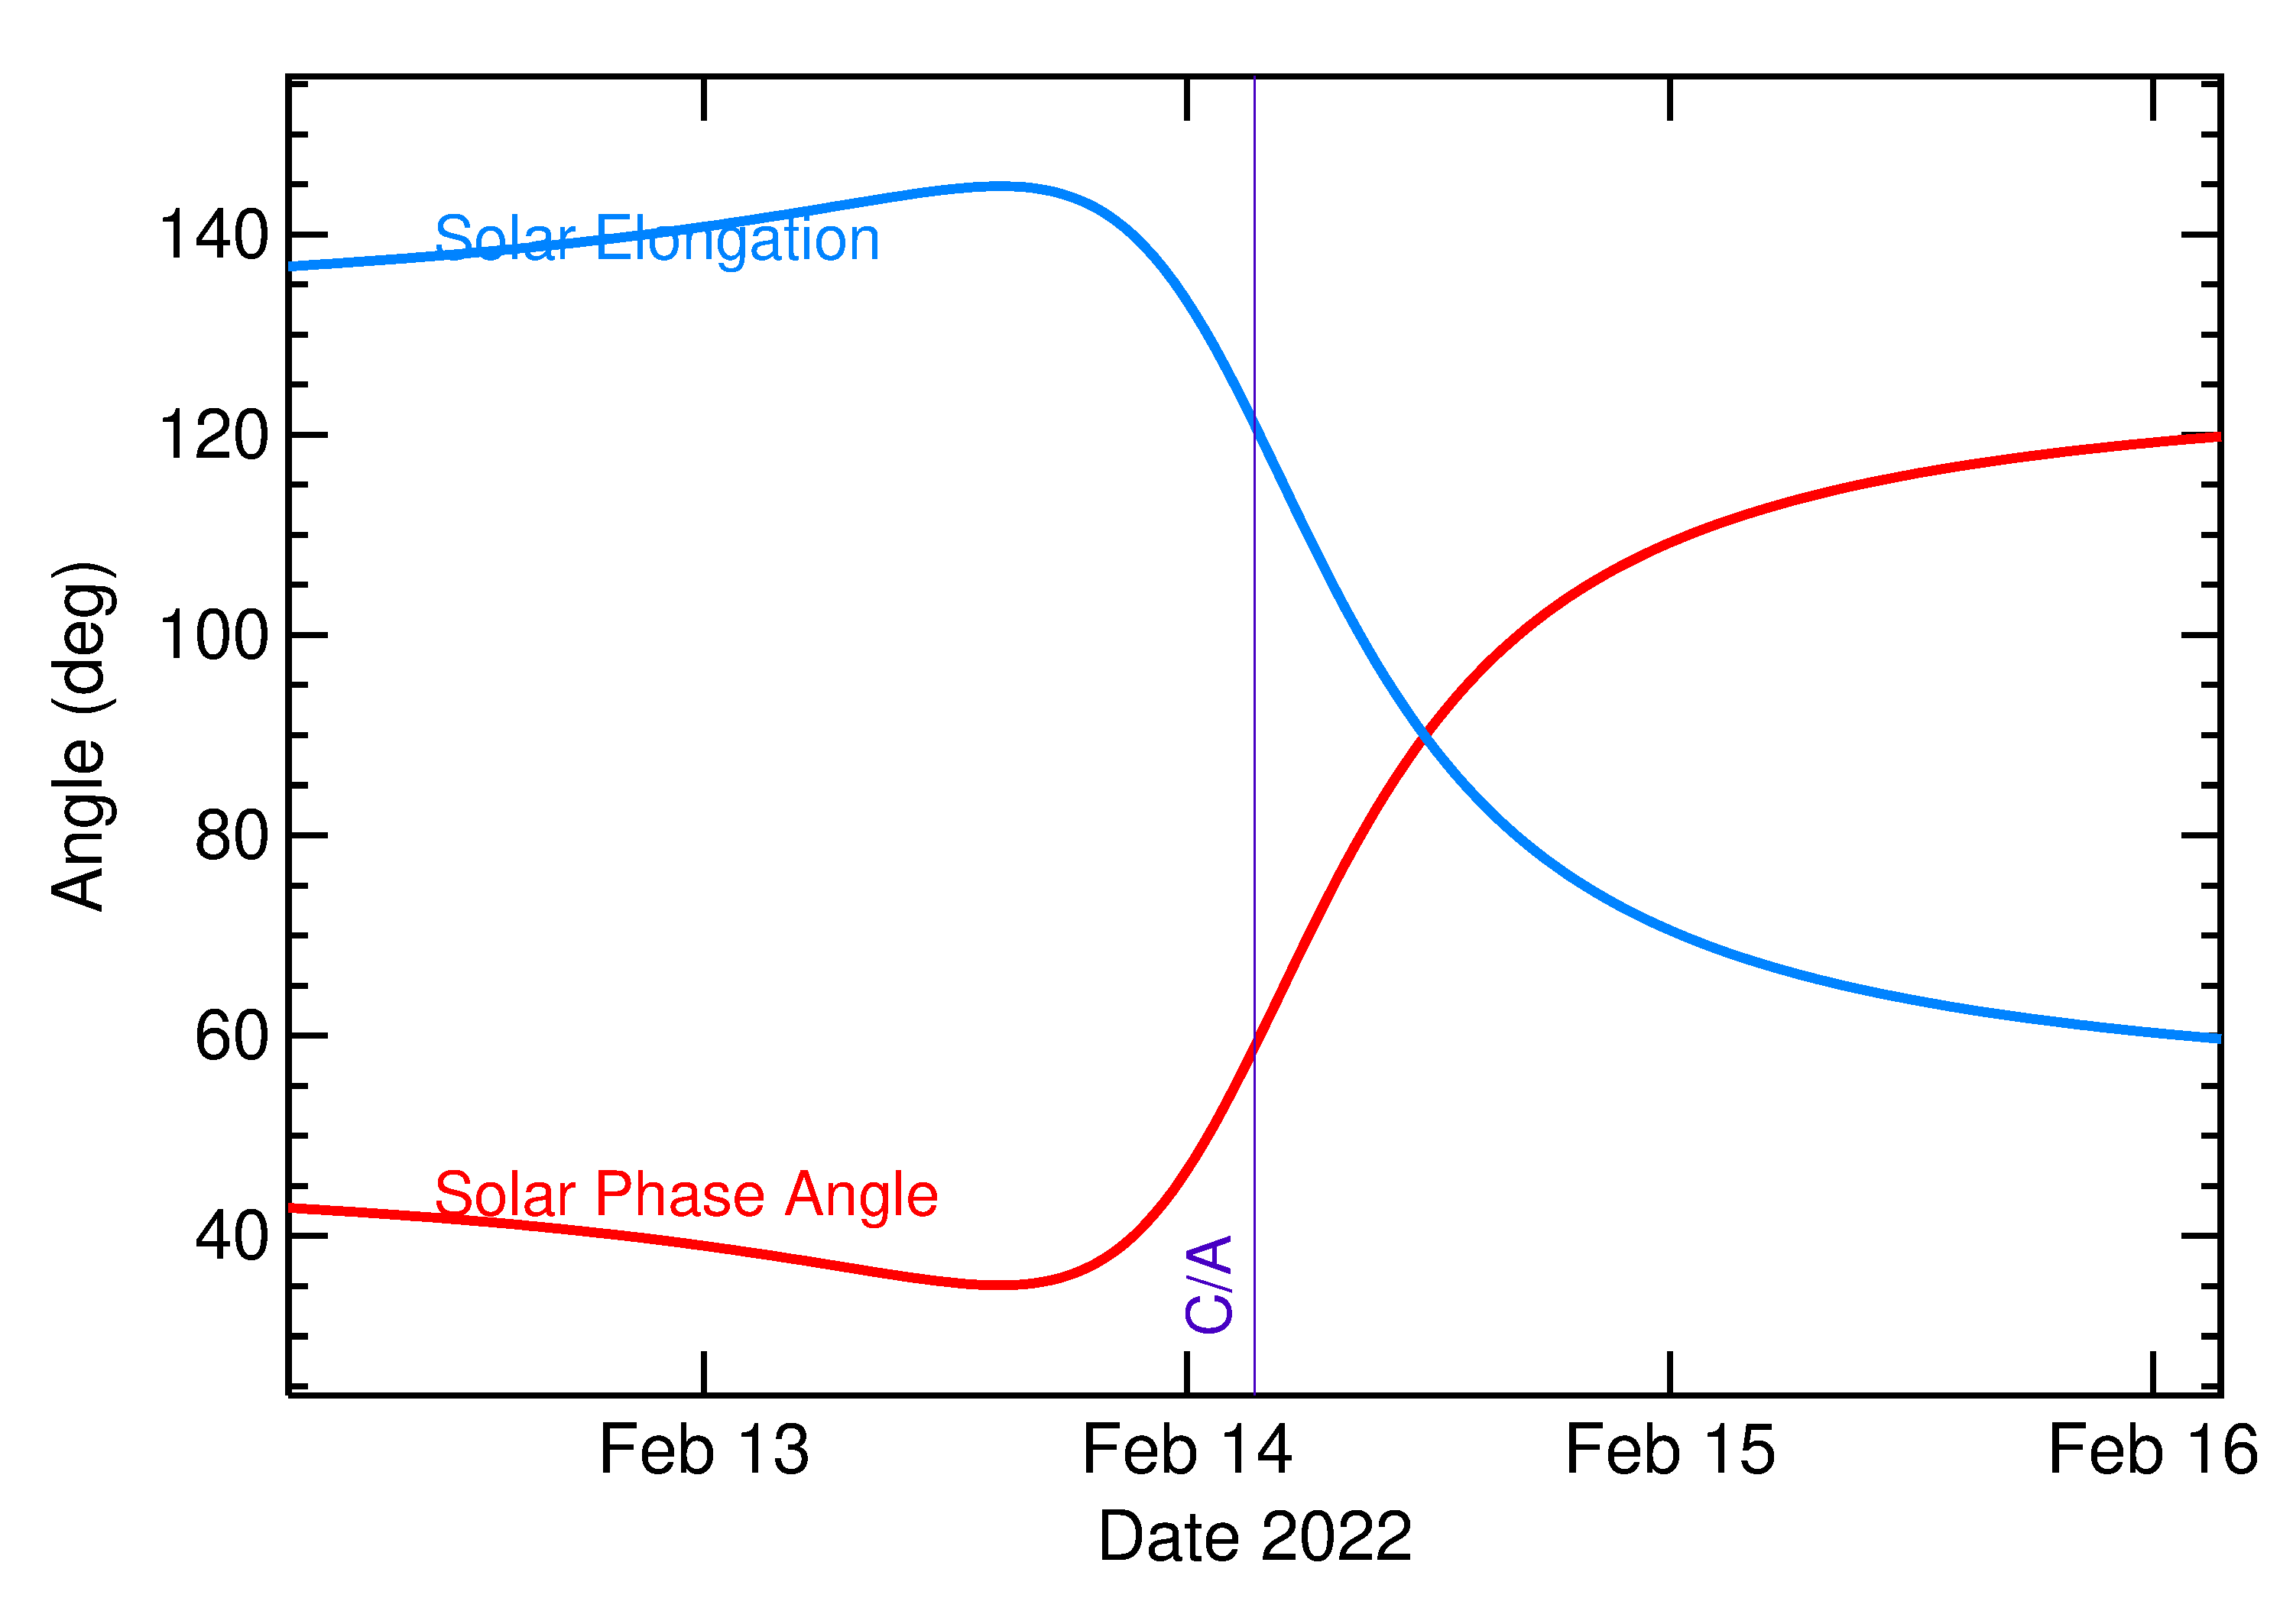 Solar Elongation and Solar Phase Angle of 2022 CF7 in the days around closest approach